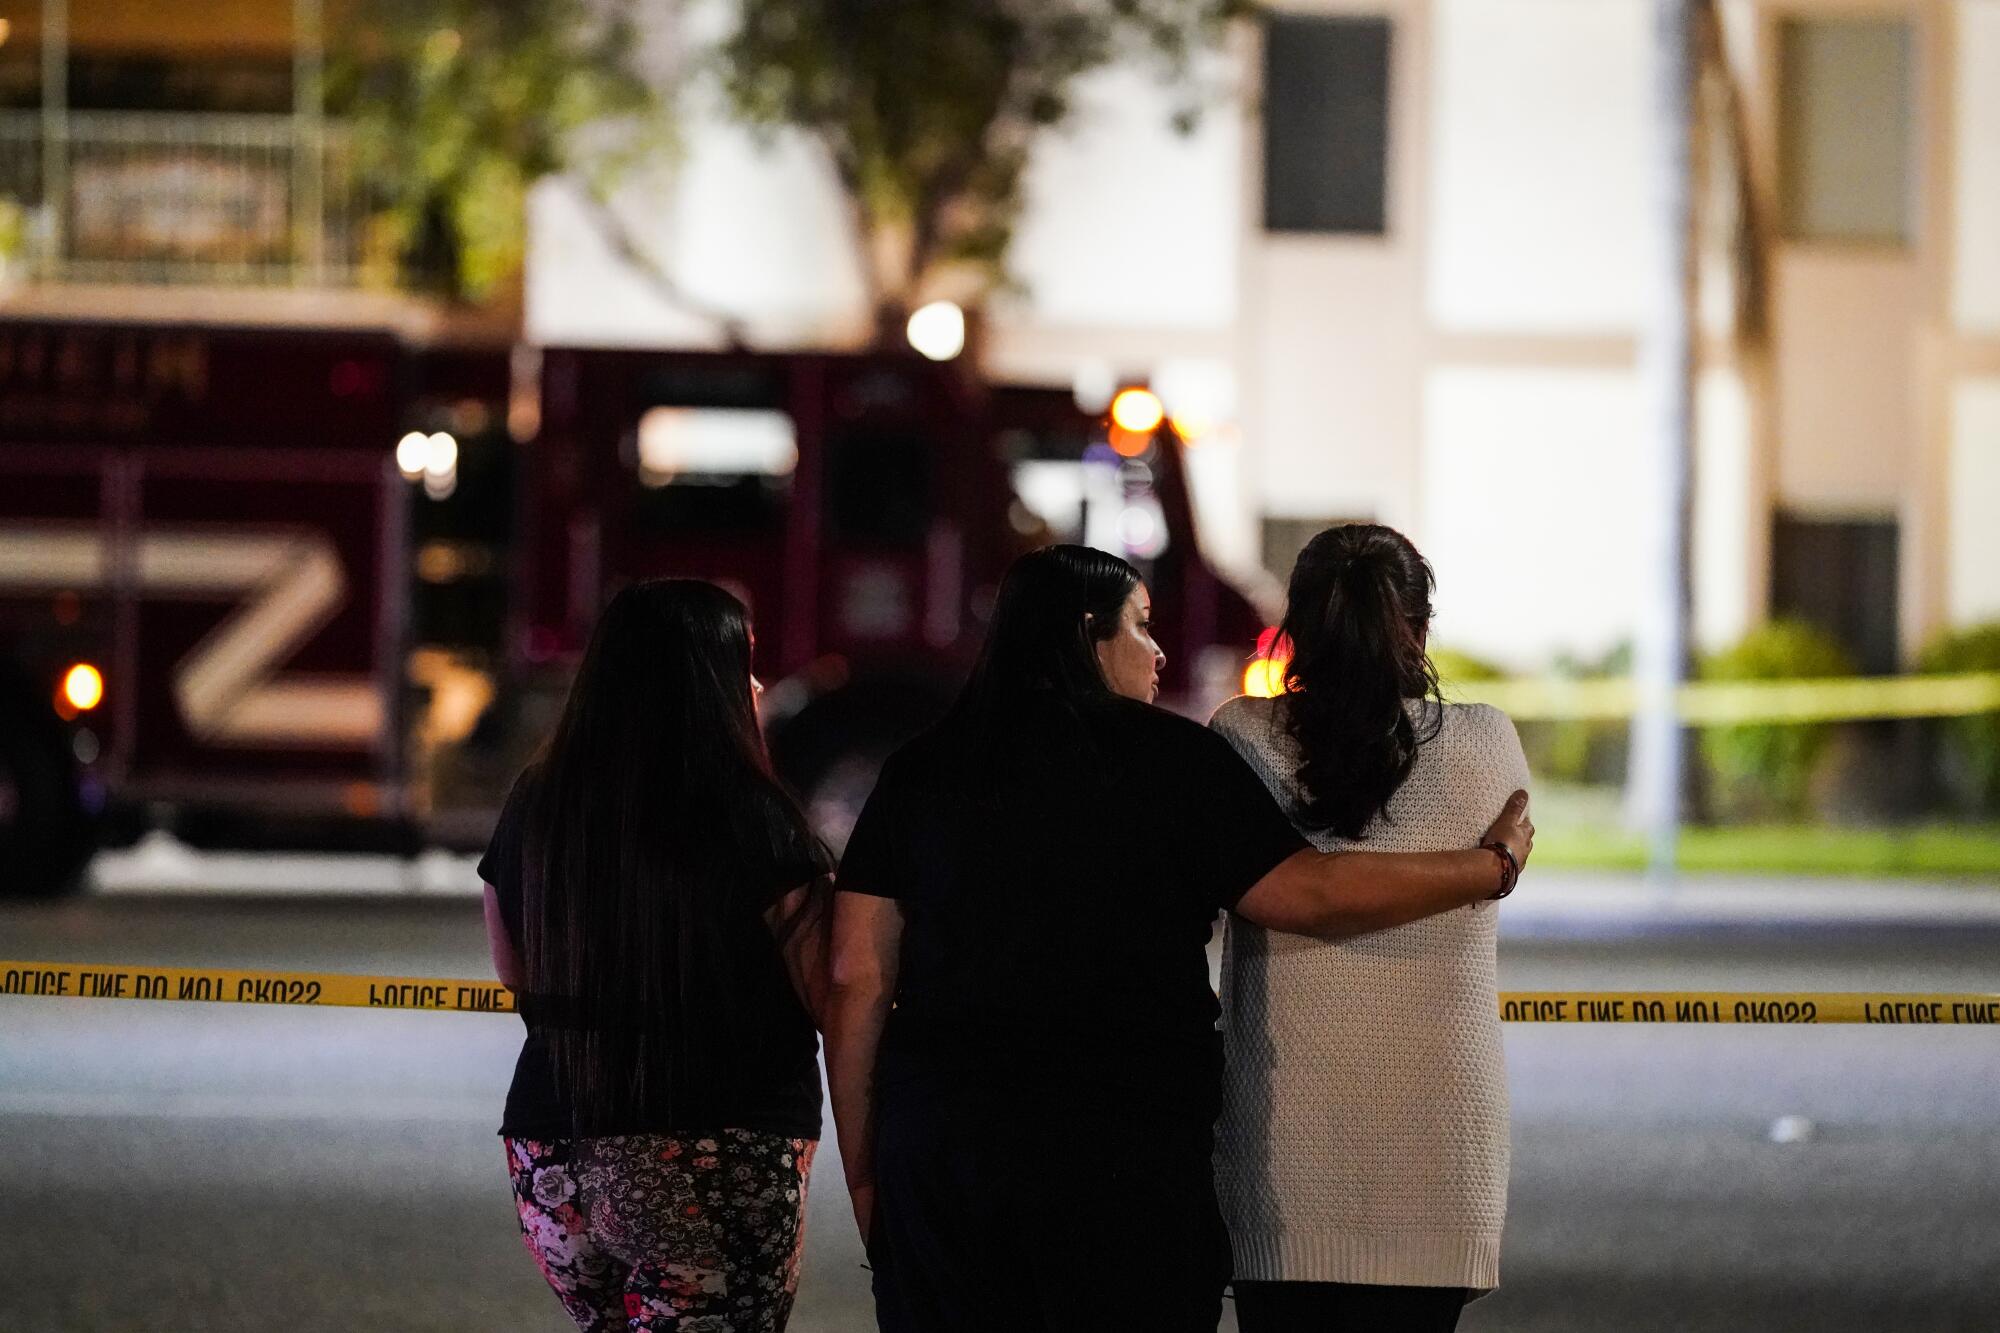 Three women, one with her arm around another, stand near the scene of the shooting.